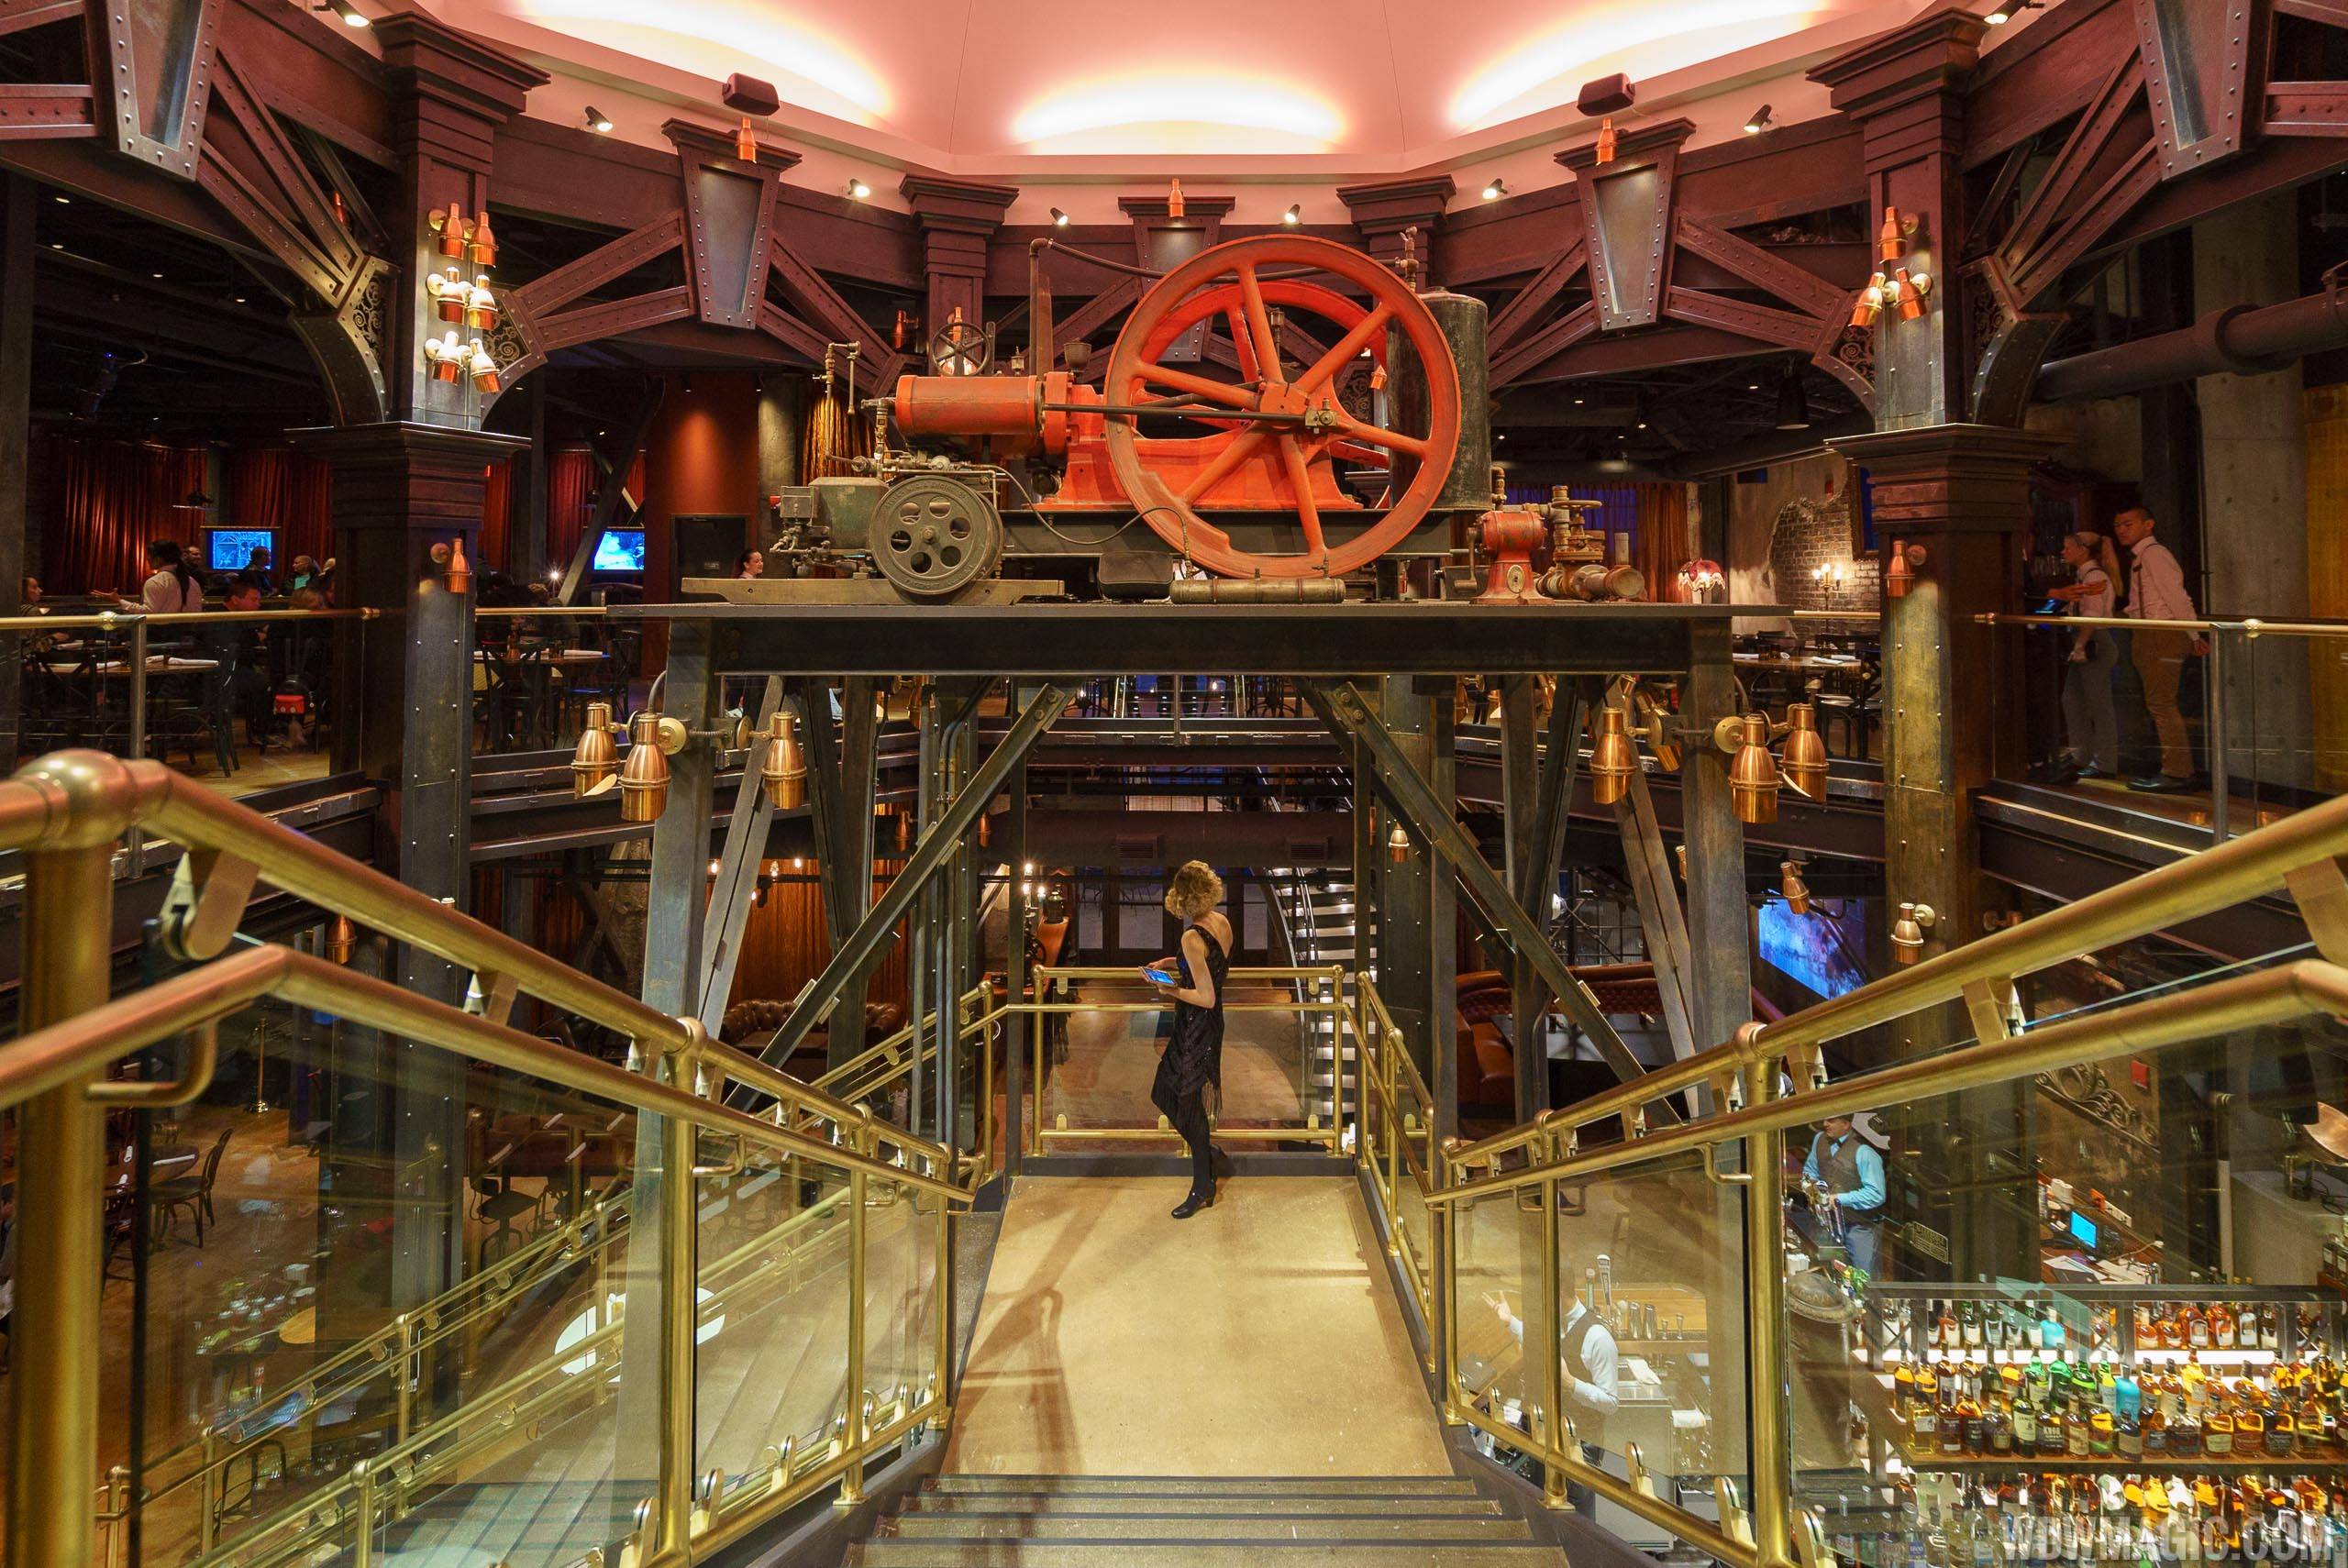 The central staircase at The Edison